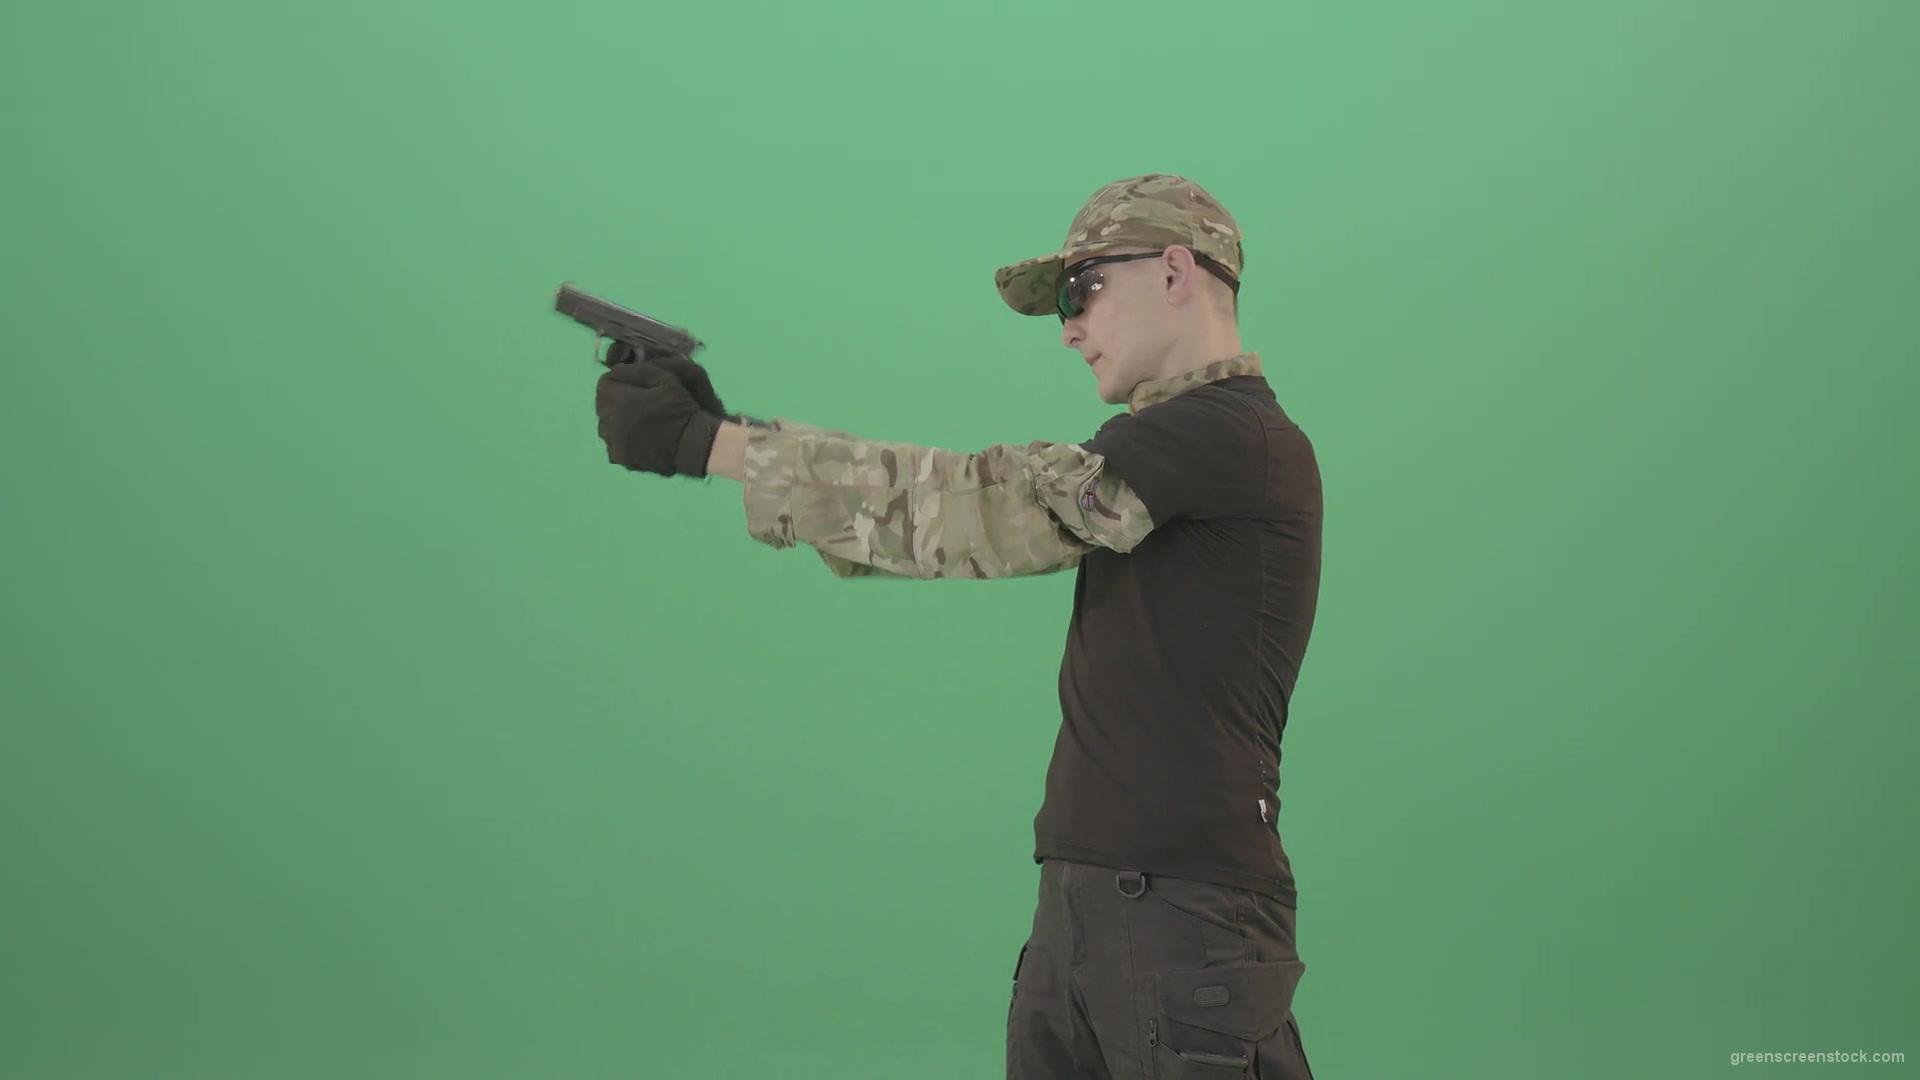 Army-Man-Assassin-shooting-with-small-gun-isolated-on-green-screen-4K-Video-Footage-1920_002 Green Screen Stock